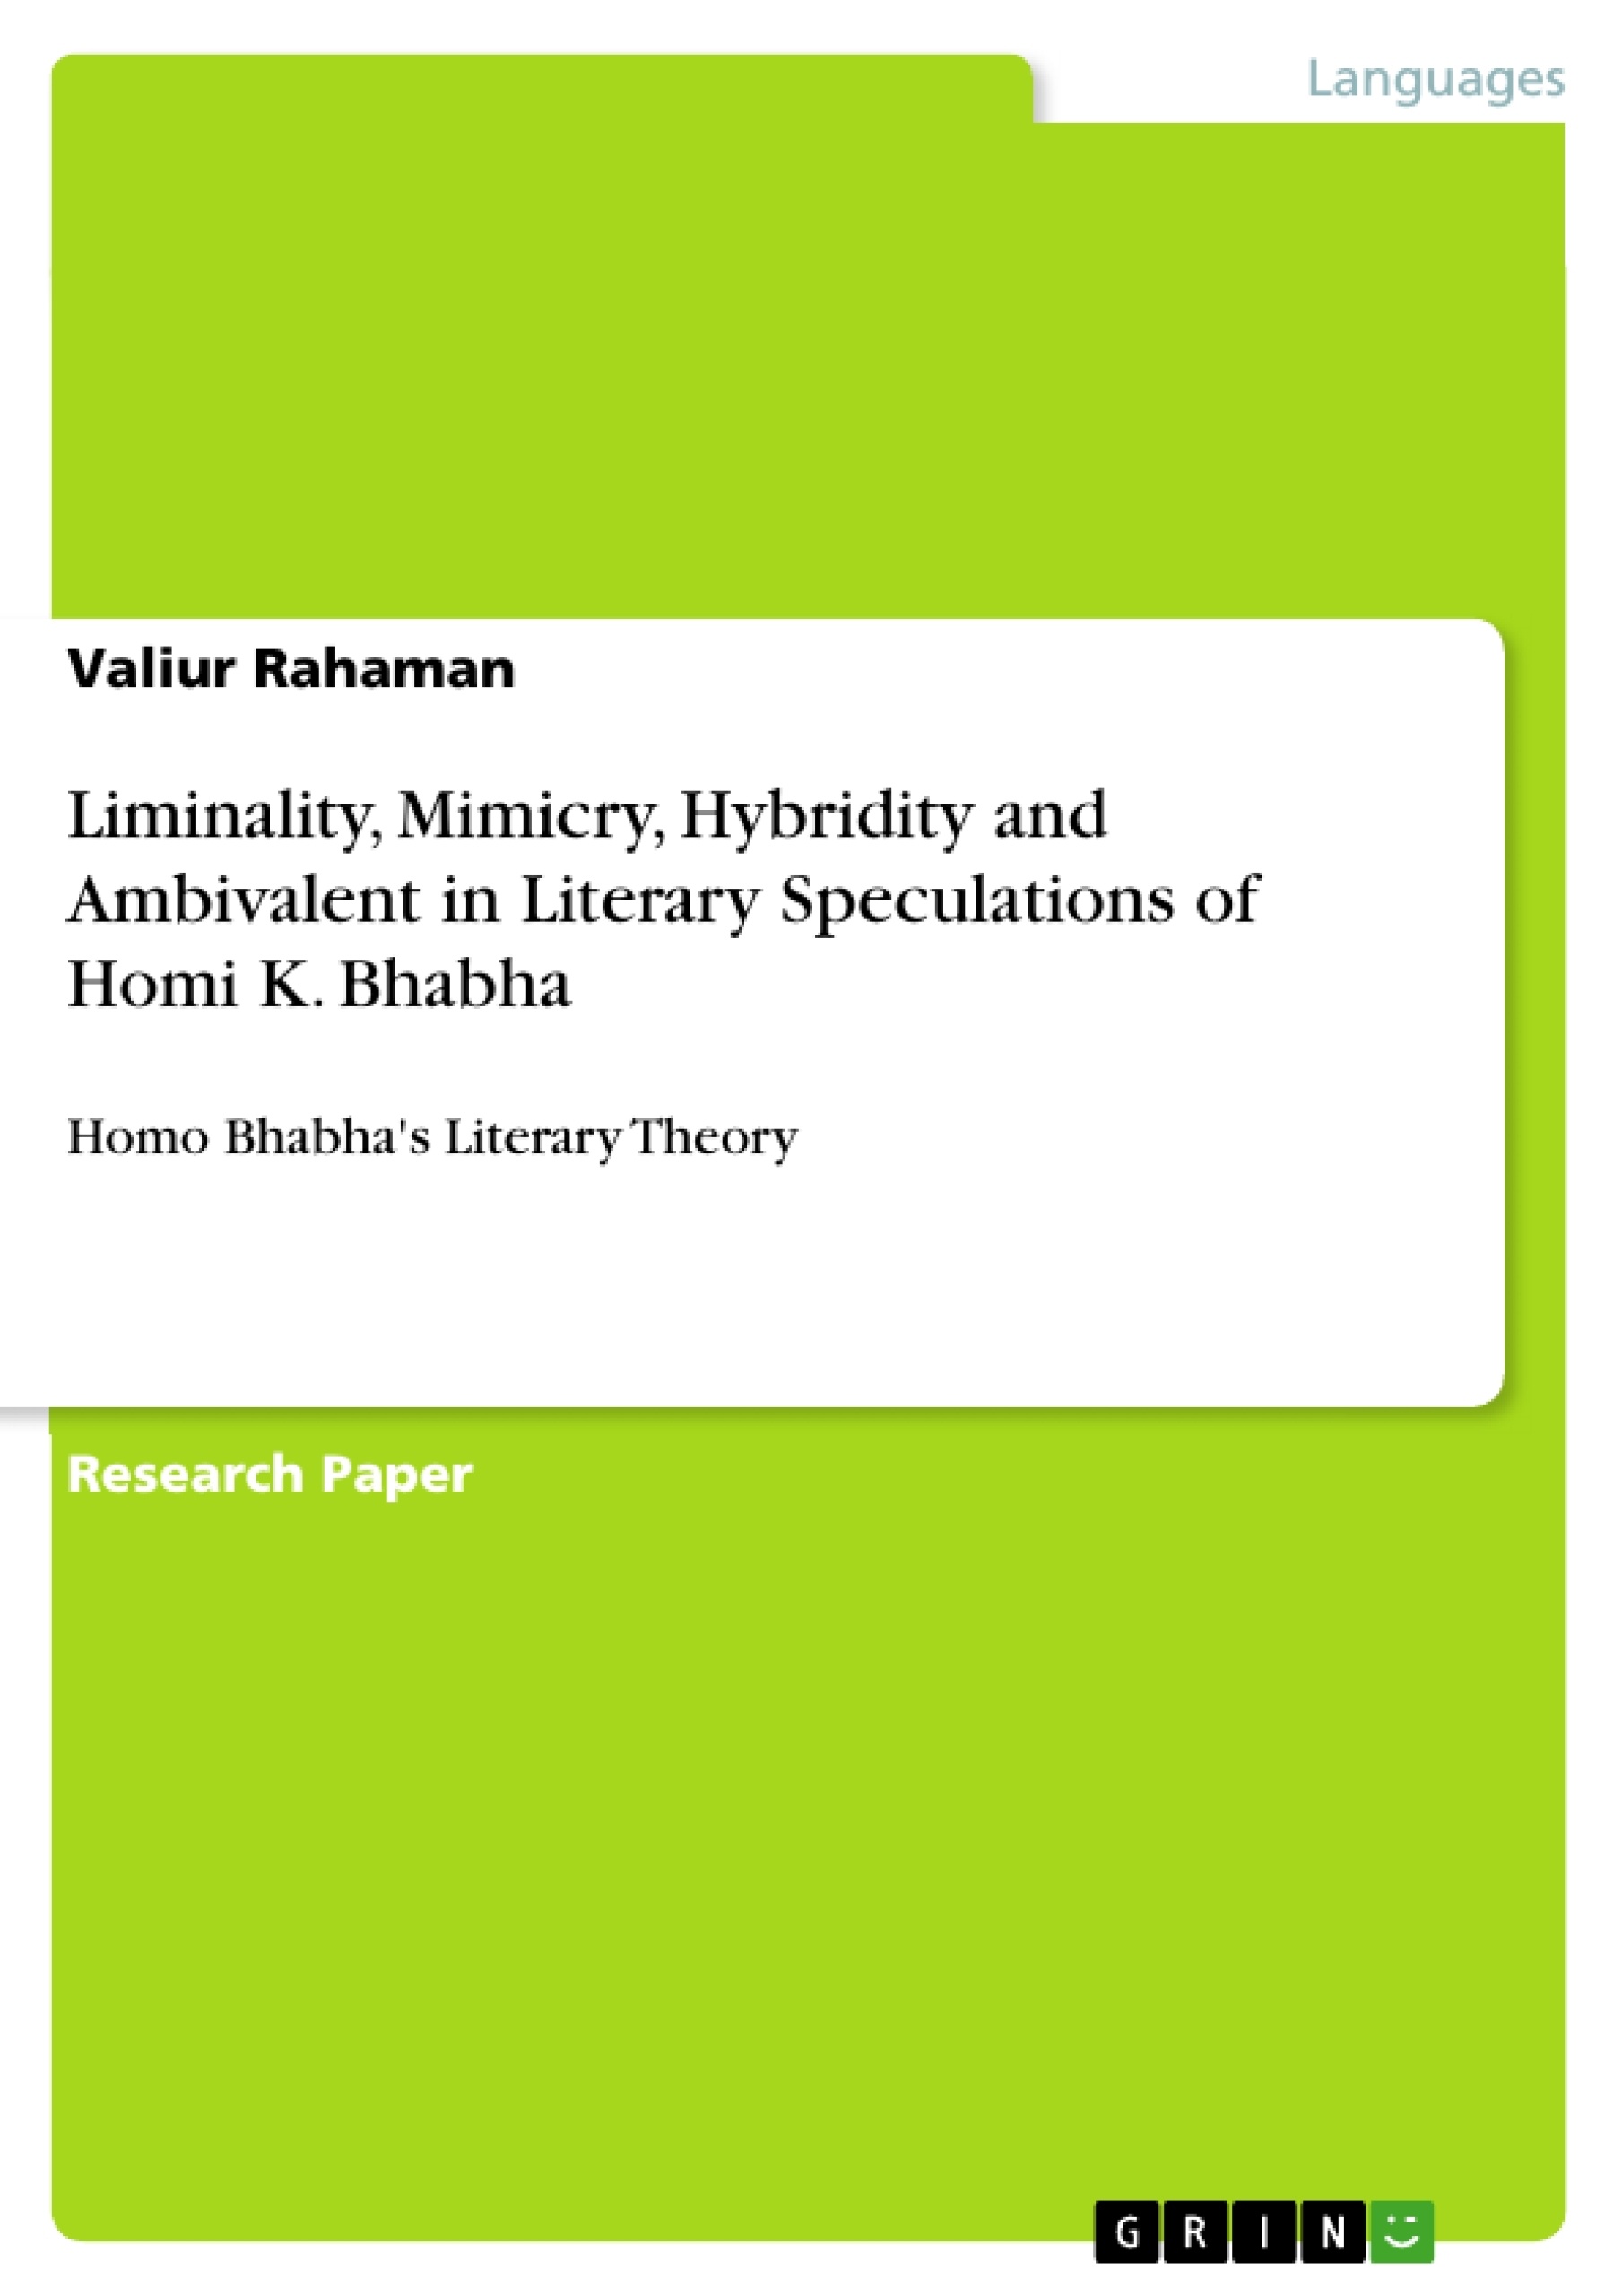 Título: Liminality, Mimicry, Hybridity and Ambivalent in Literary Speculations of Homi K. Bhabha